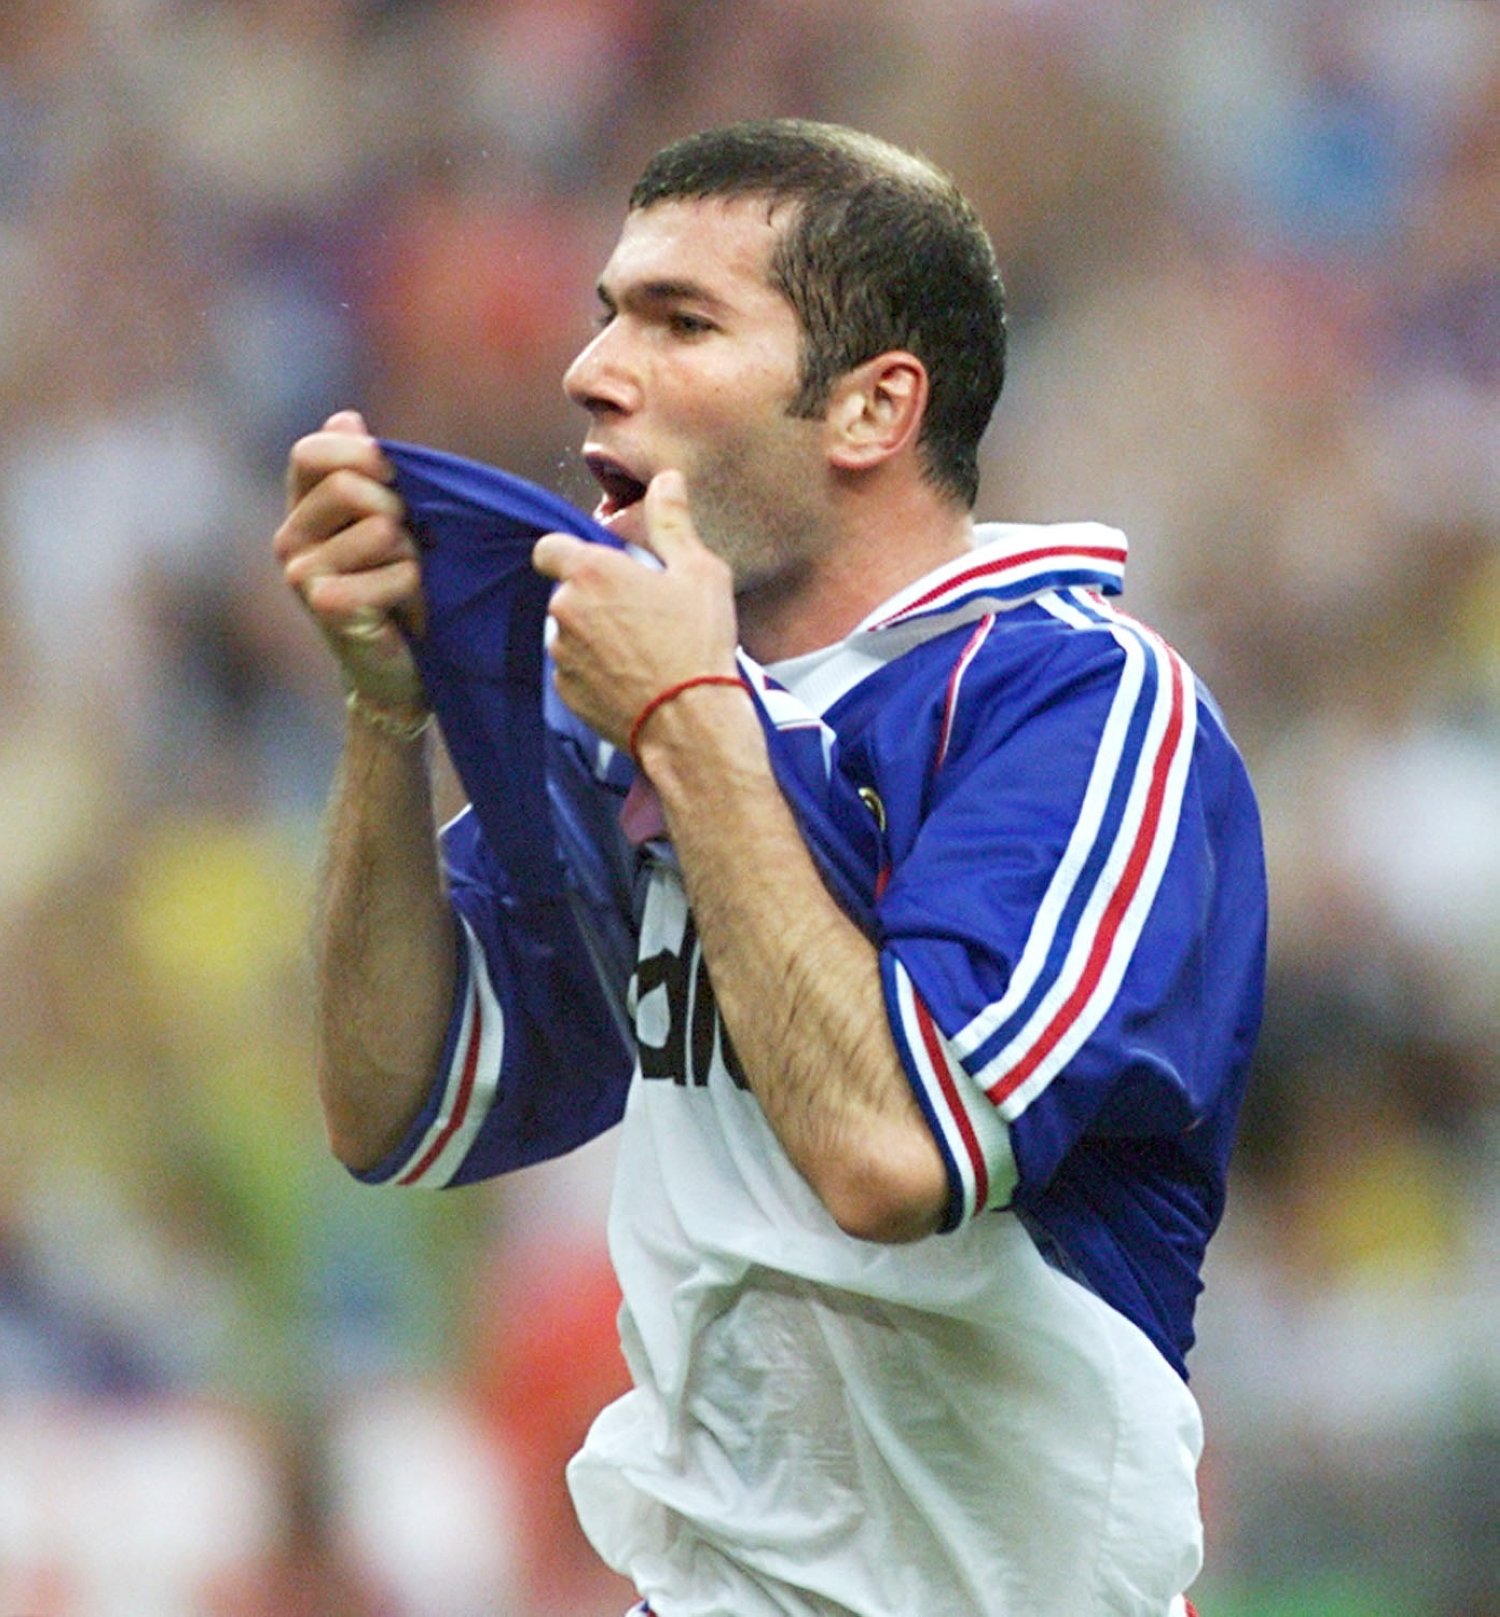 French Zinedine Zidane celebrates after scoring the second goal for his team during the 1998 World Cup final match between Brazil and France at the Stade de France in Saint-Denis, France, July 12, 1998. (AFP Photo)